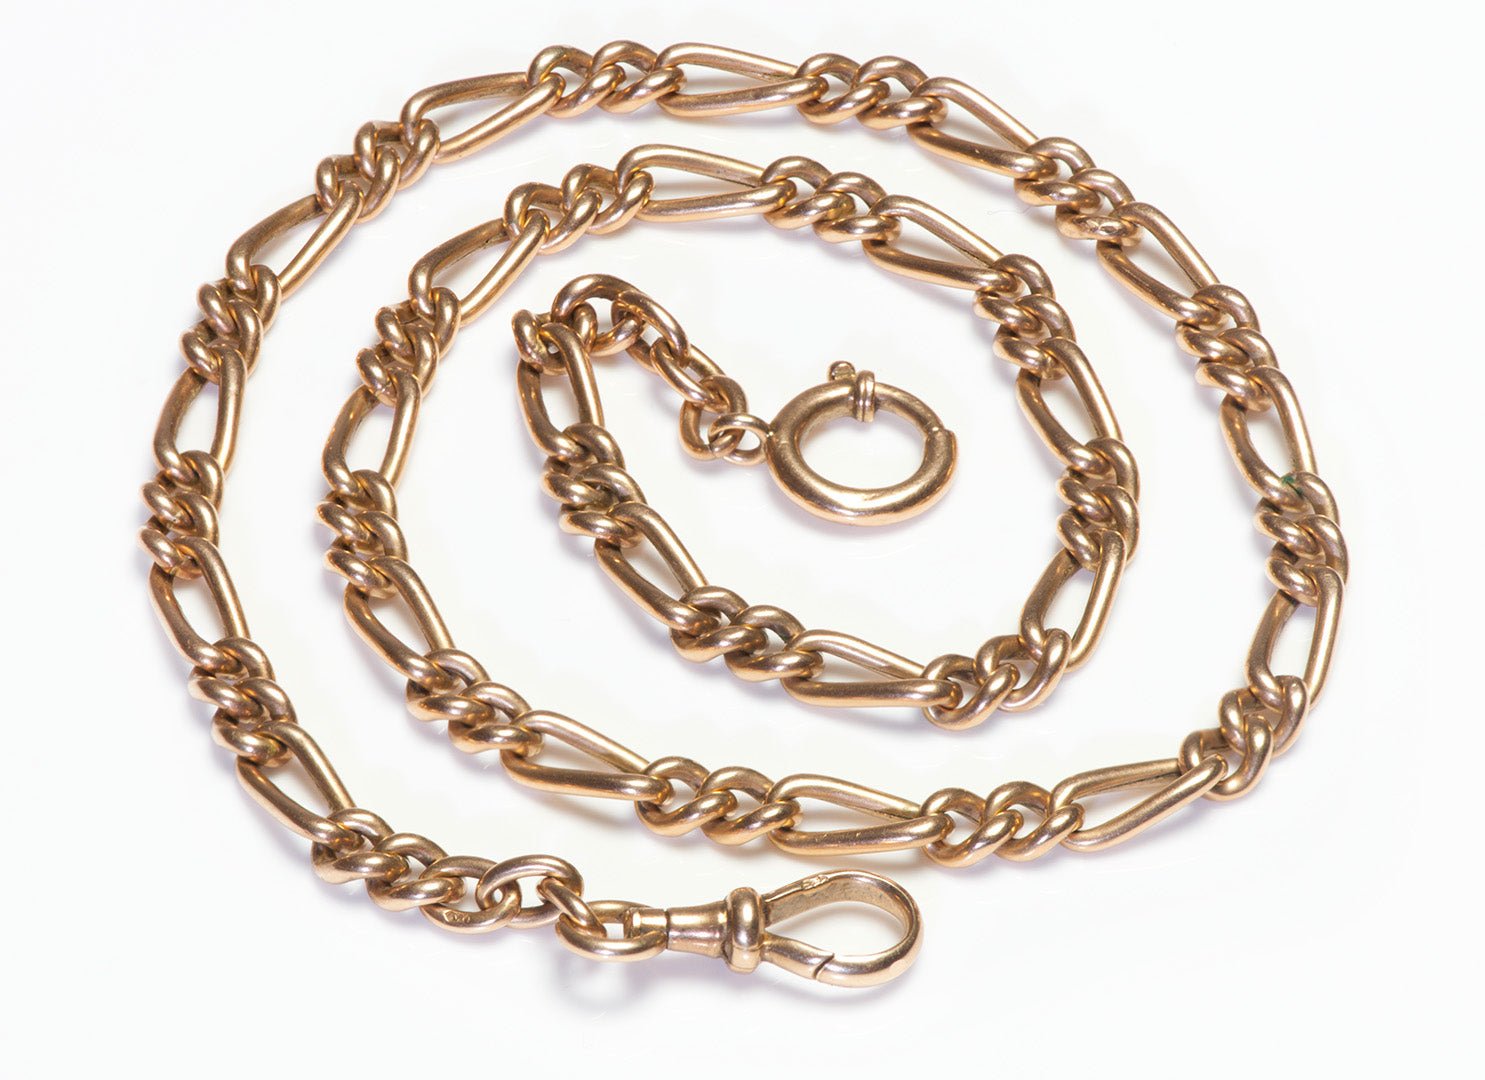 Antique Yellow Gold Link Watch Chain - DSF Antique Jewelry